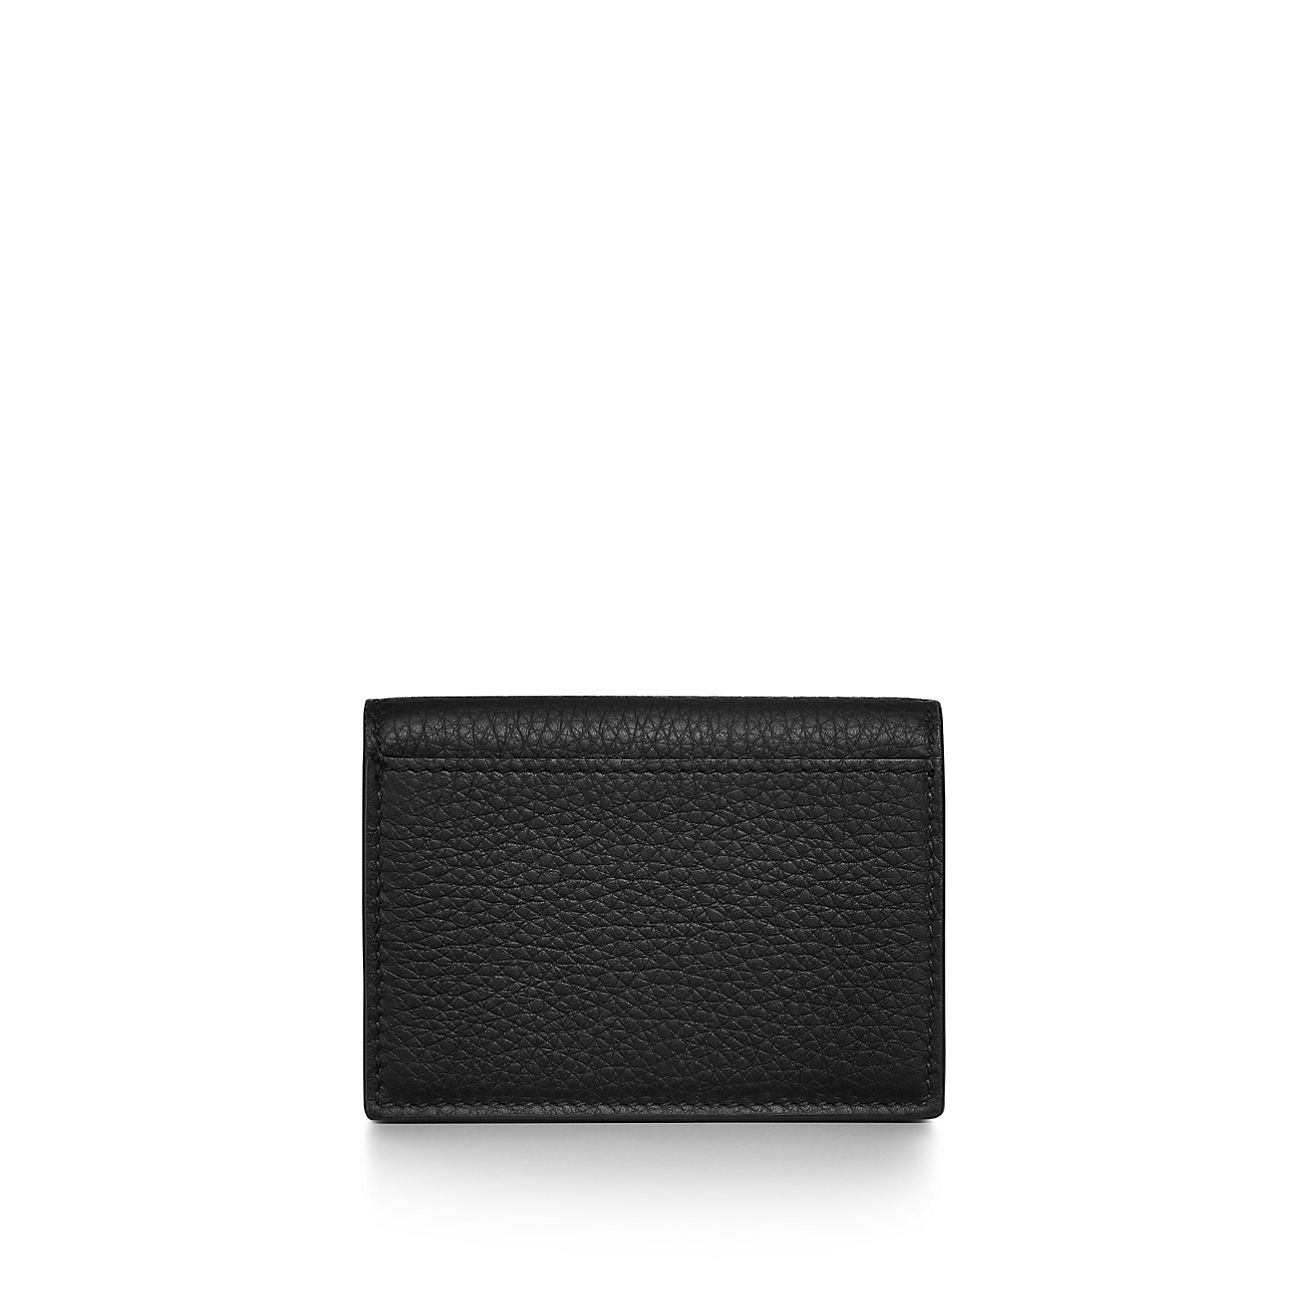 T&CO. Flap Card Holder